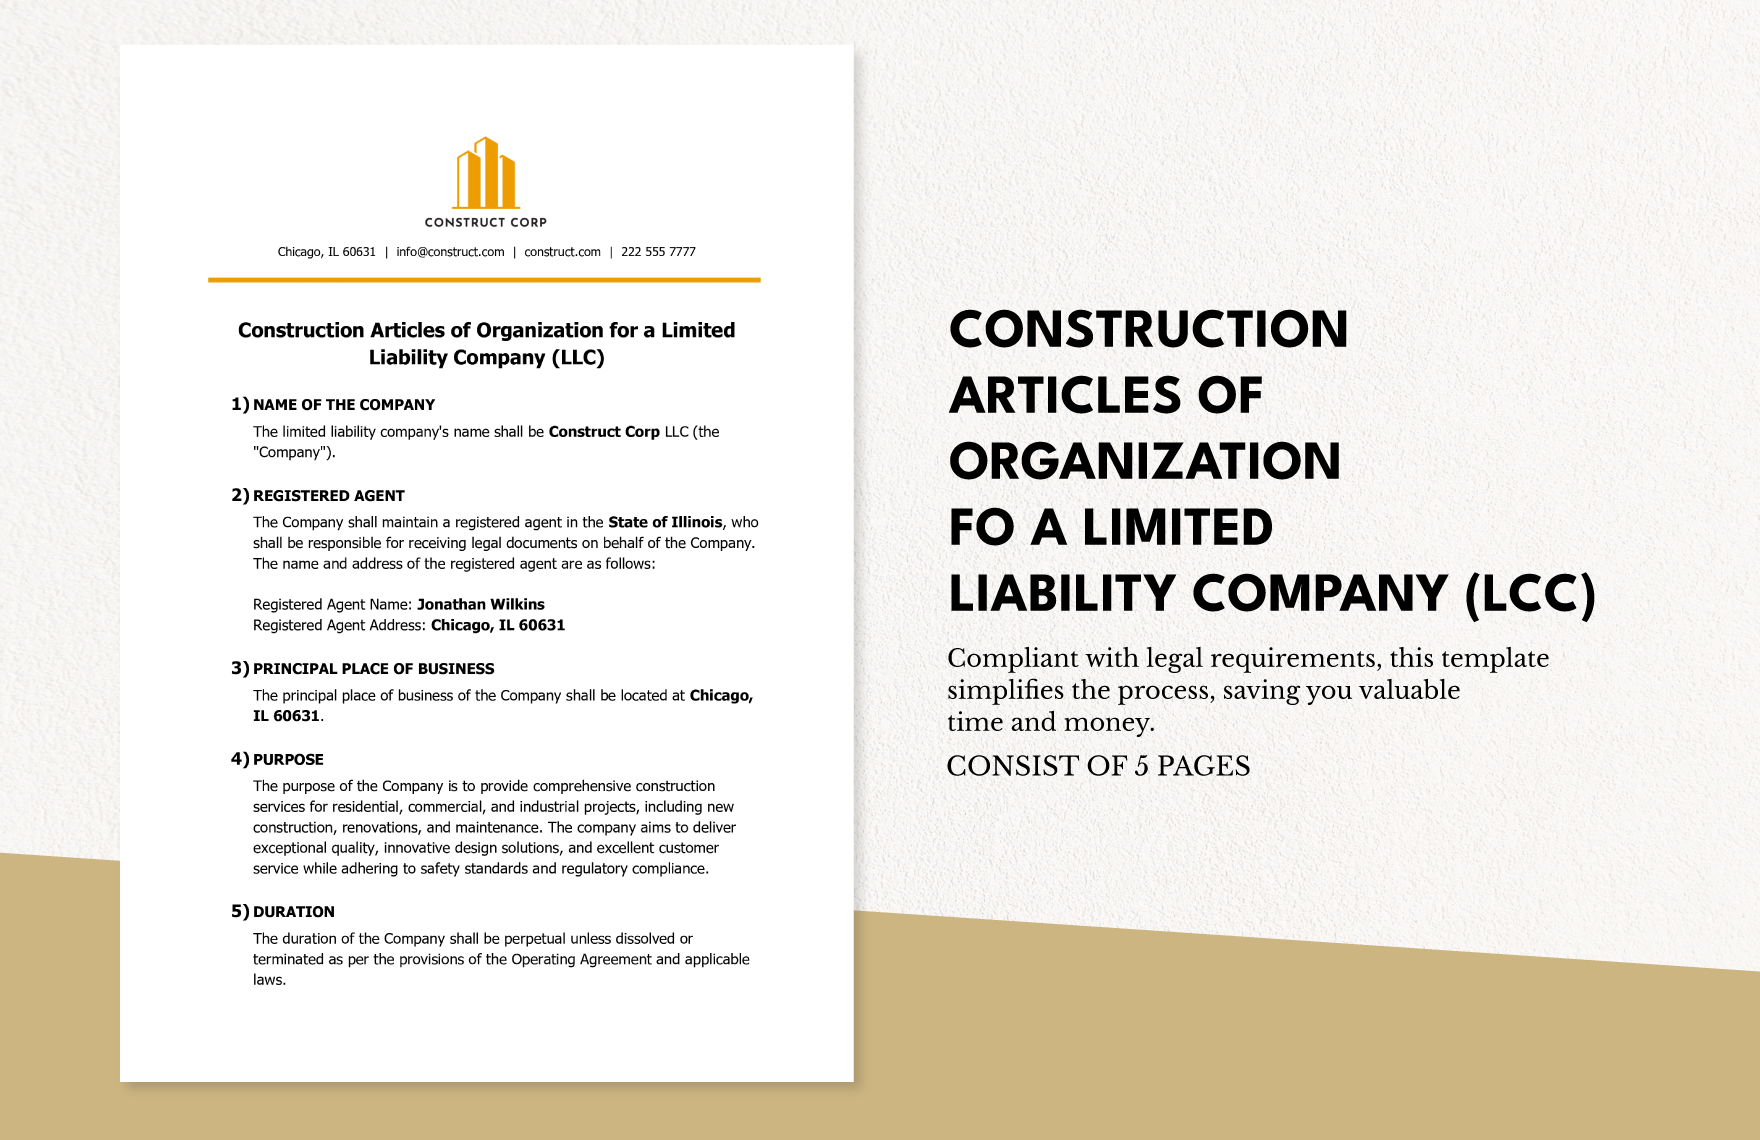 Construction Articles of Organization for a Limited Liability Company (LLC) Template